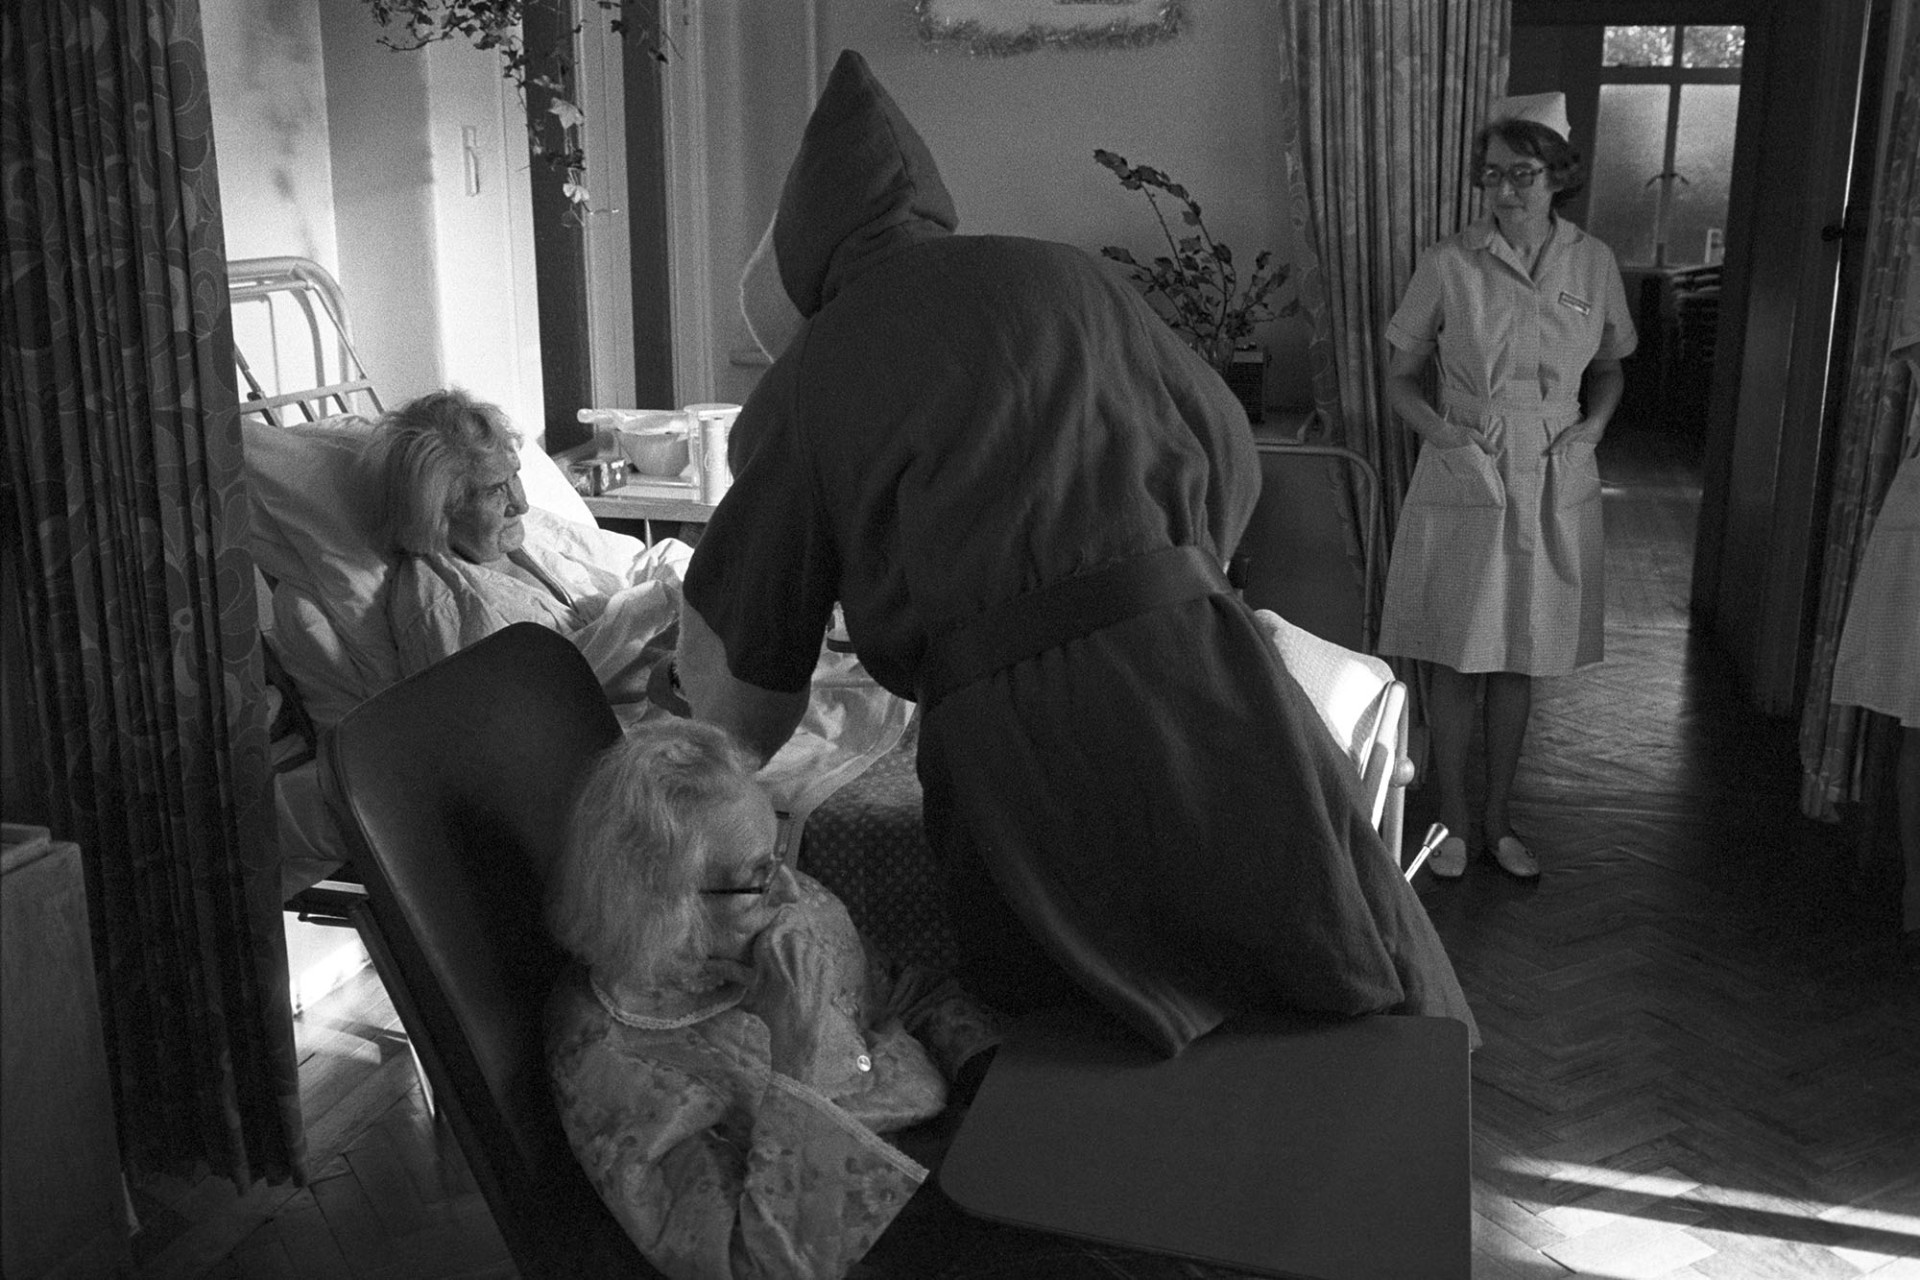 Doctor as Father Christmas in hospital ward, Christmas Day, reassuring woman patient.
[Dr Cramp dressed as Father Christmas visiting patients on the ward in Torrington Cottage Hospital with a nurse standing watching.]